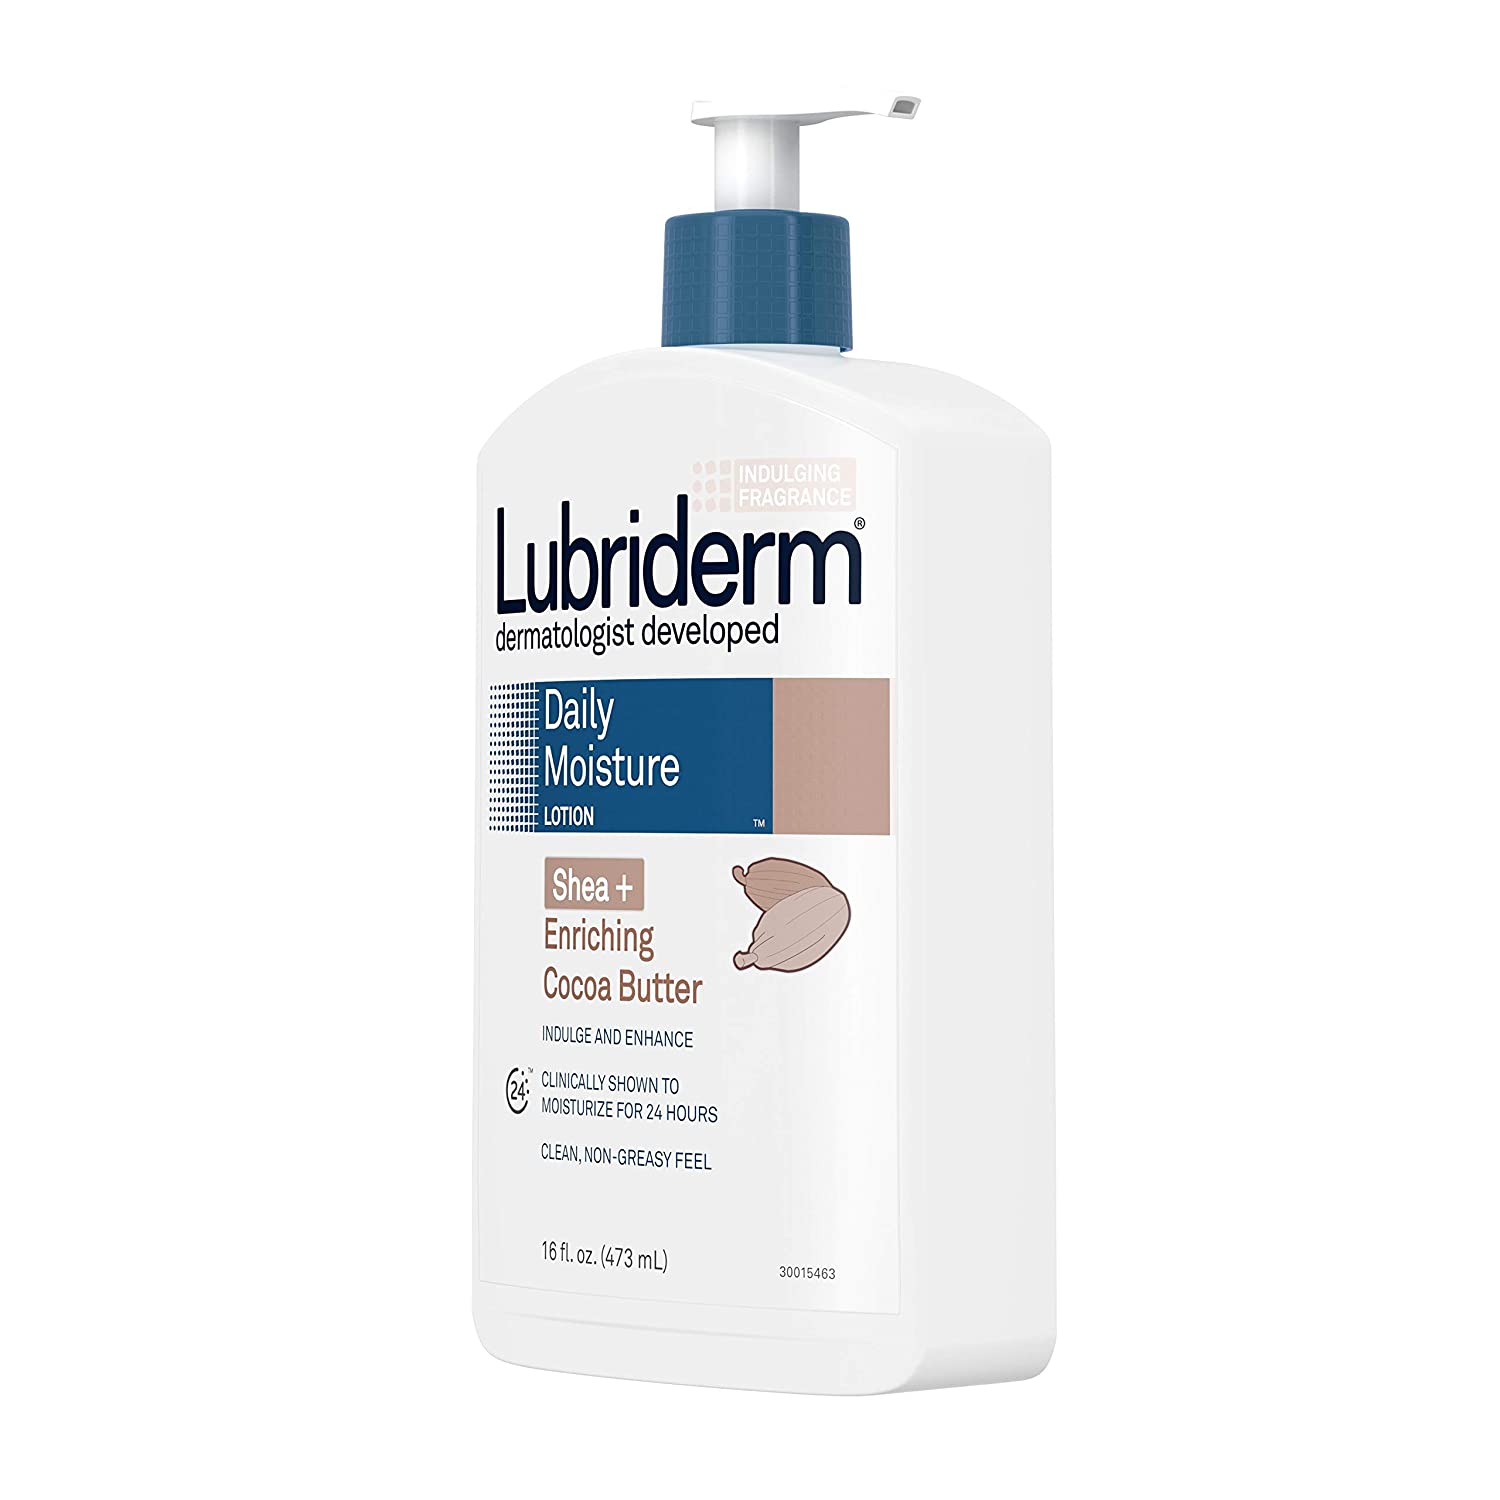 Lubriderm Daily Moisture Lotion - Shea Butter Enriching Cocoa Butter